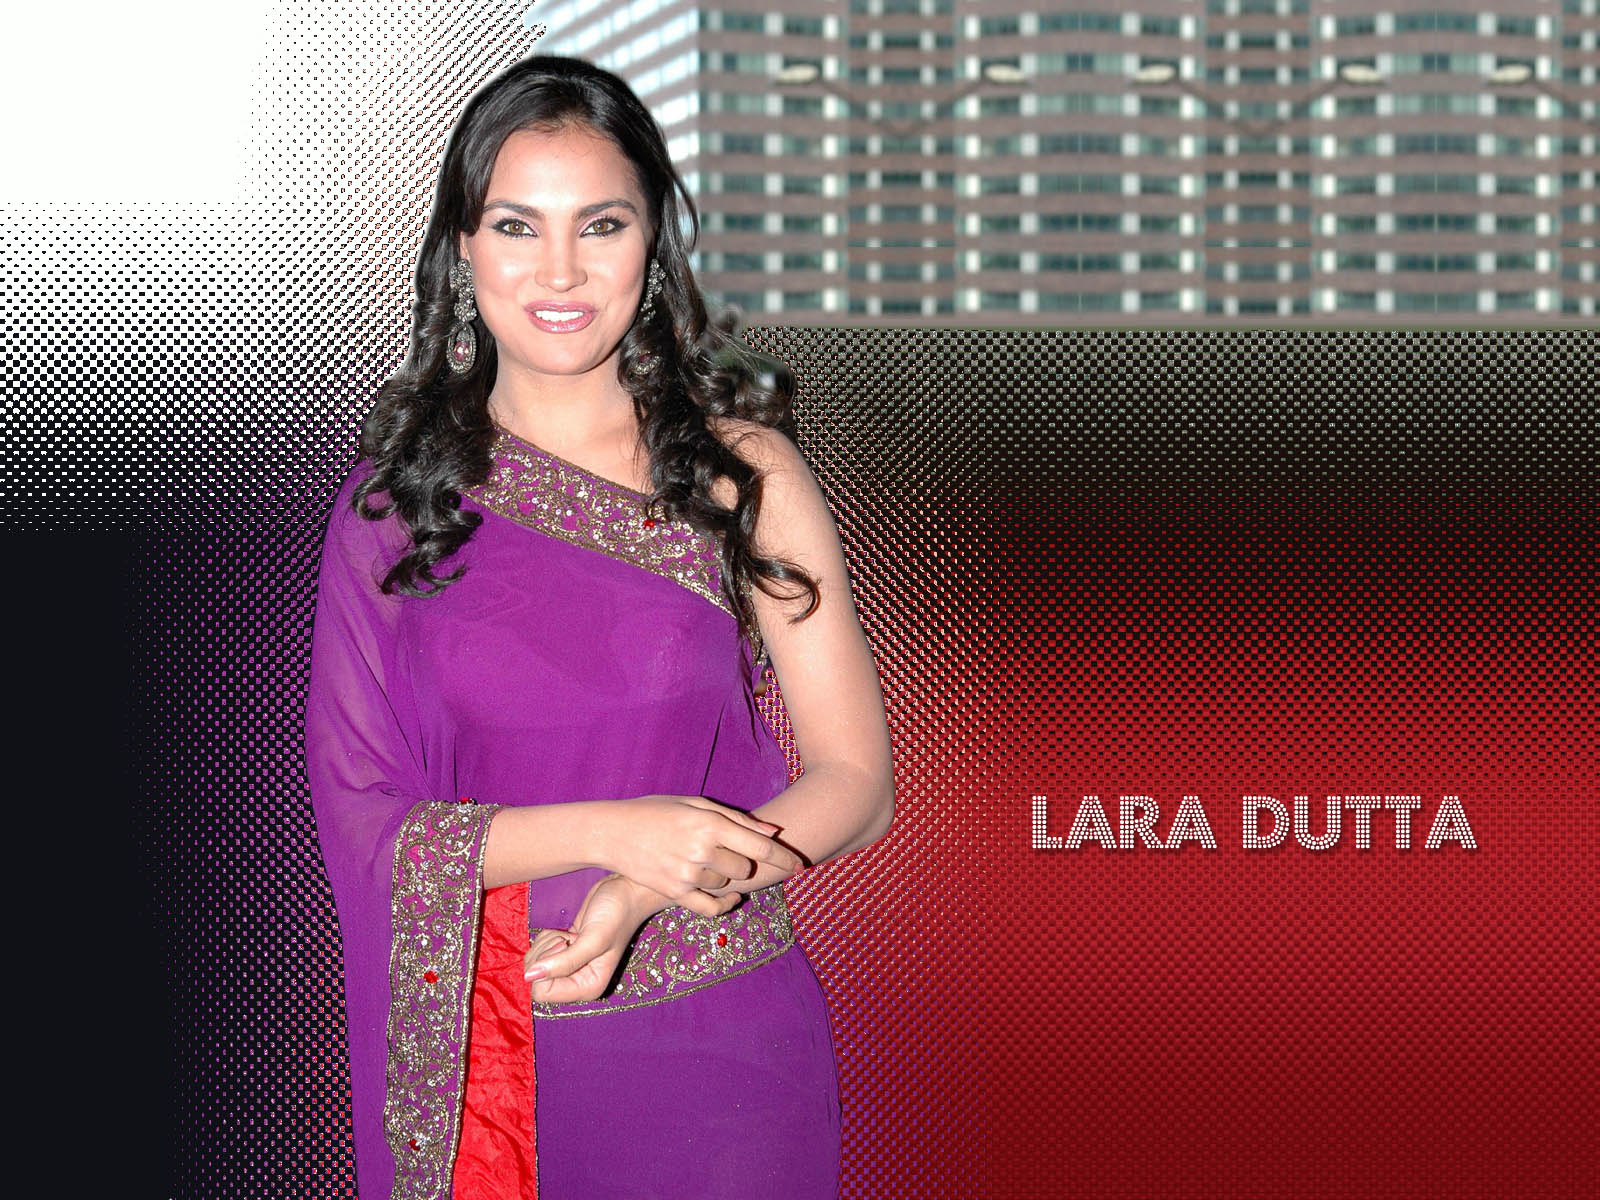 Lara Dutta Sexy Images Afro Spear Ftc 53465 Hot Sex Picture